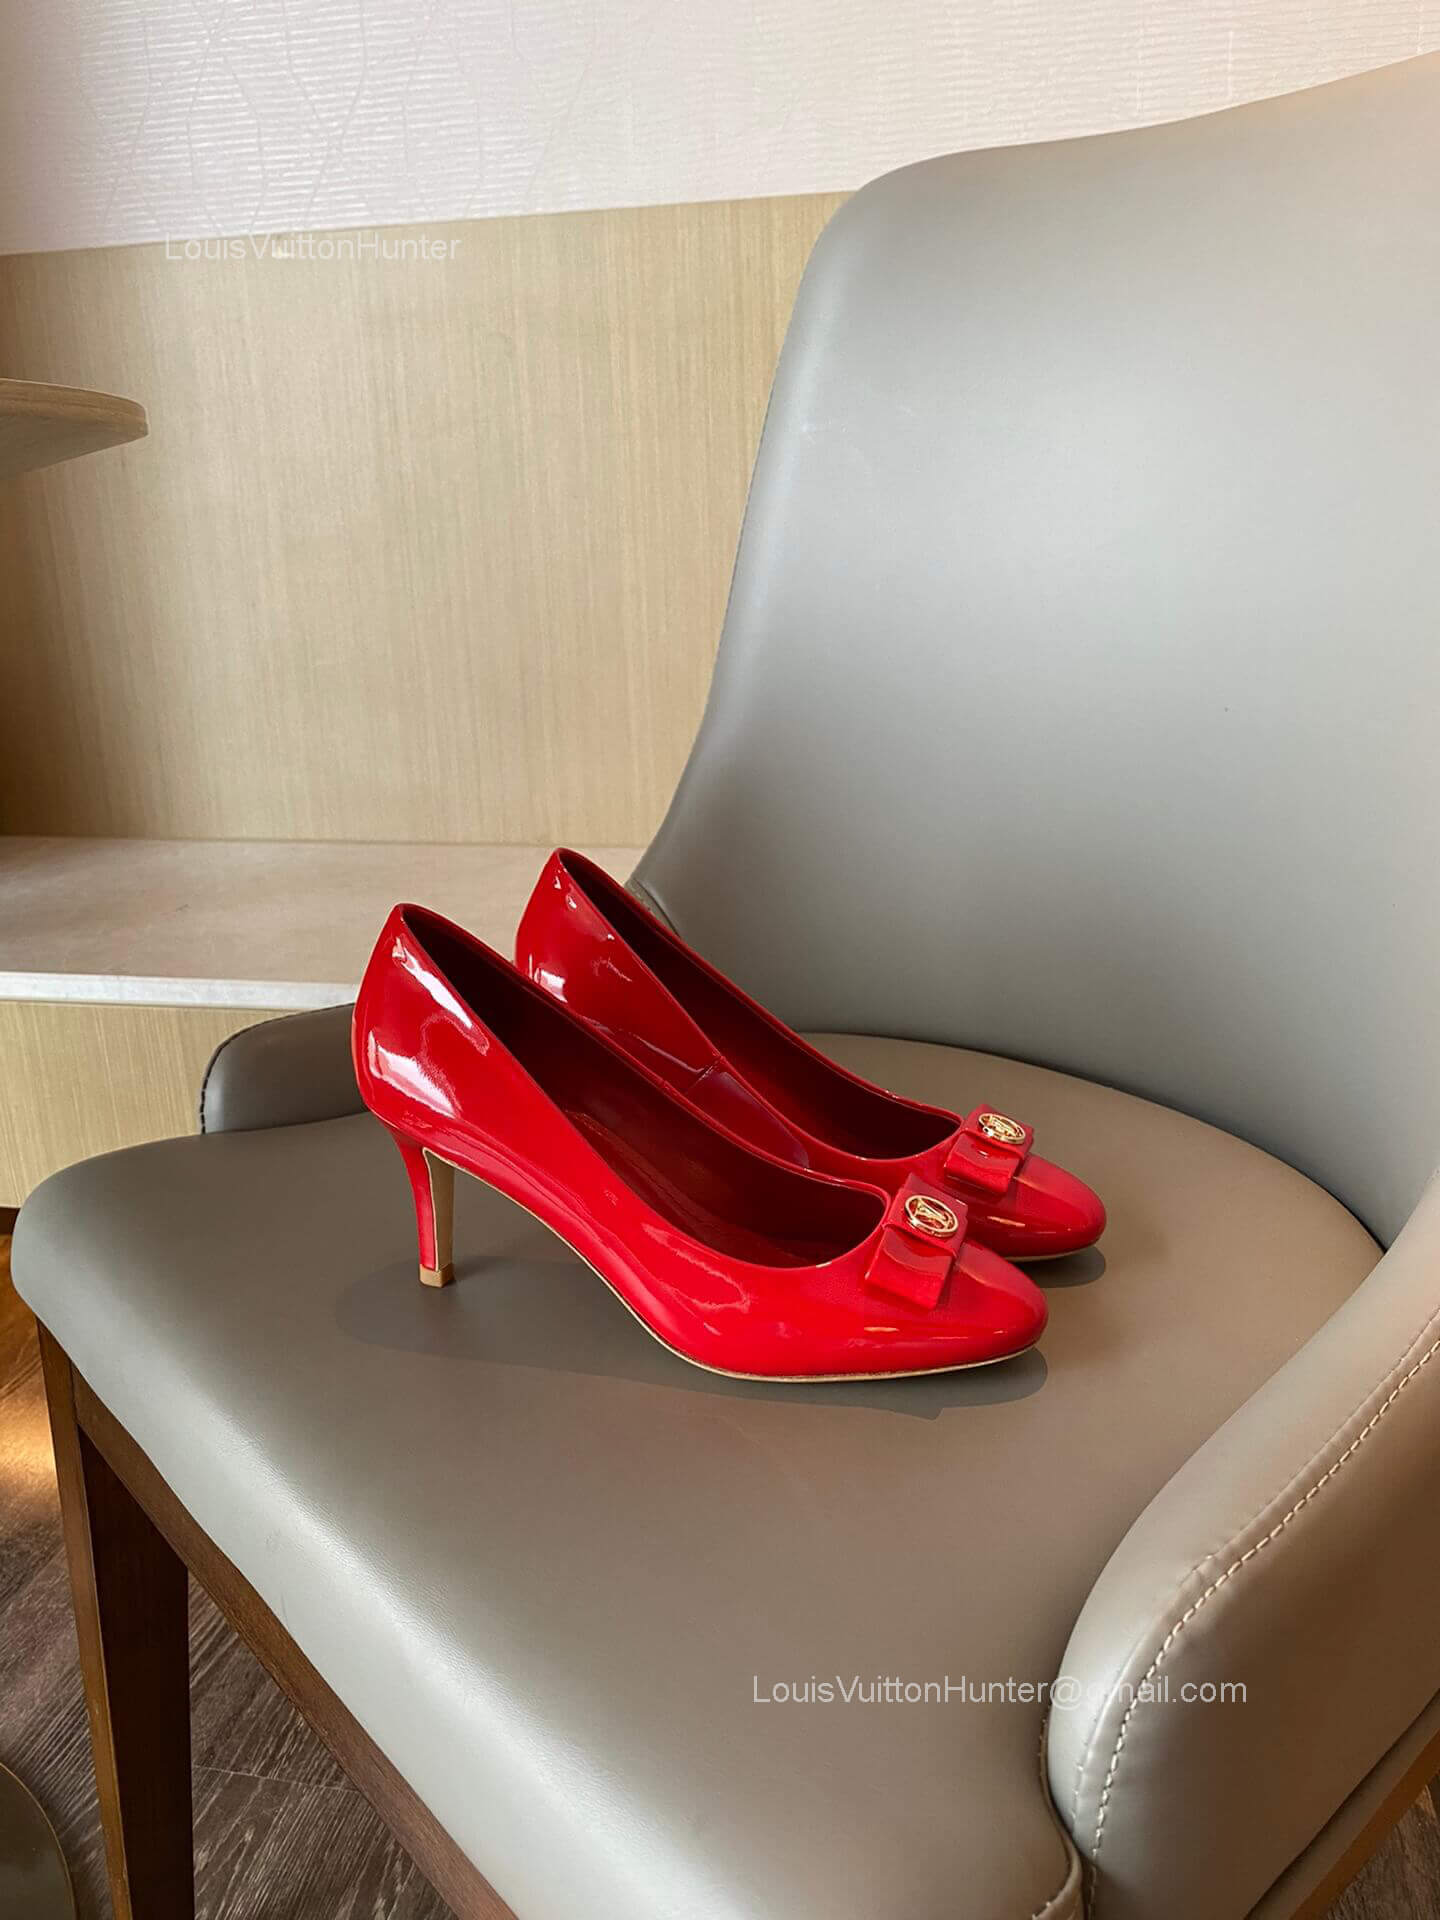 Louis Vuitton Fiancee Classic Feminine Pumps in Red Patent Calf Leather 65MM 2281737